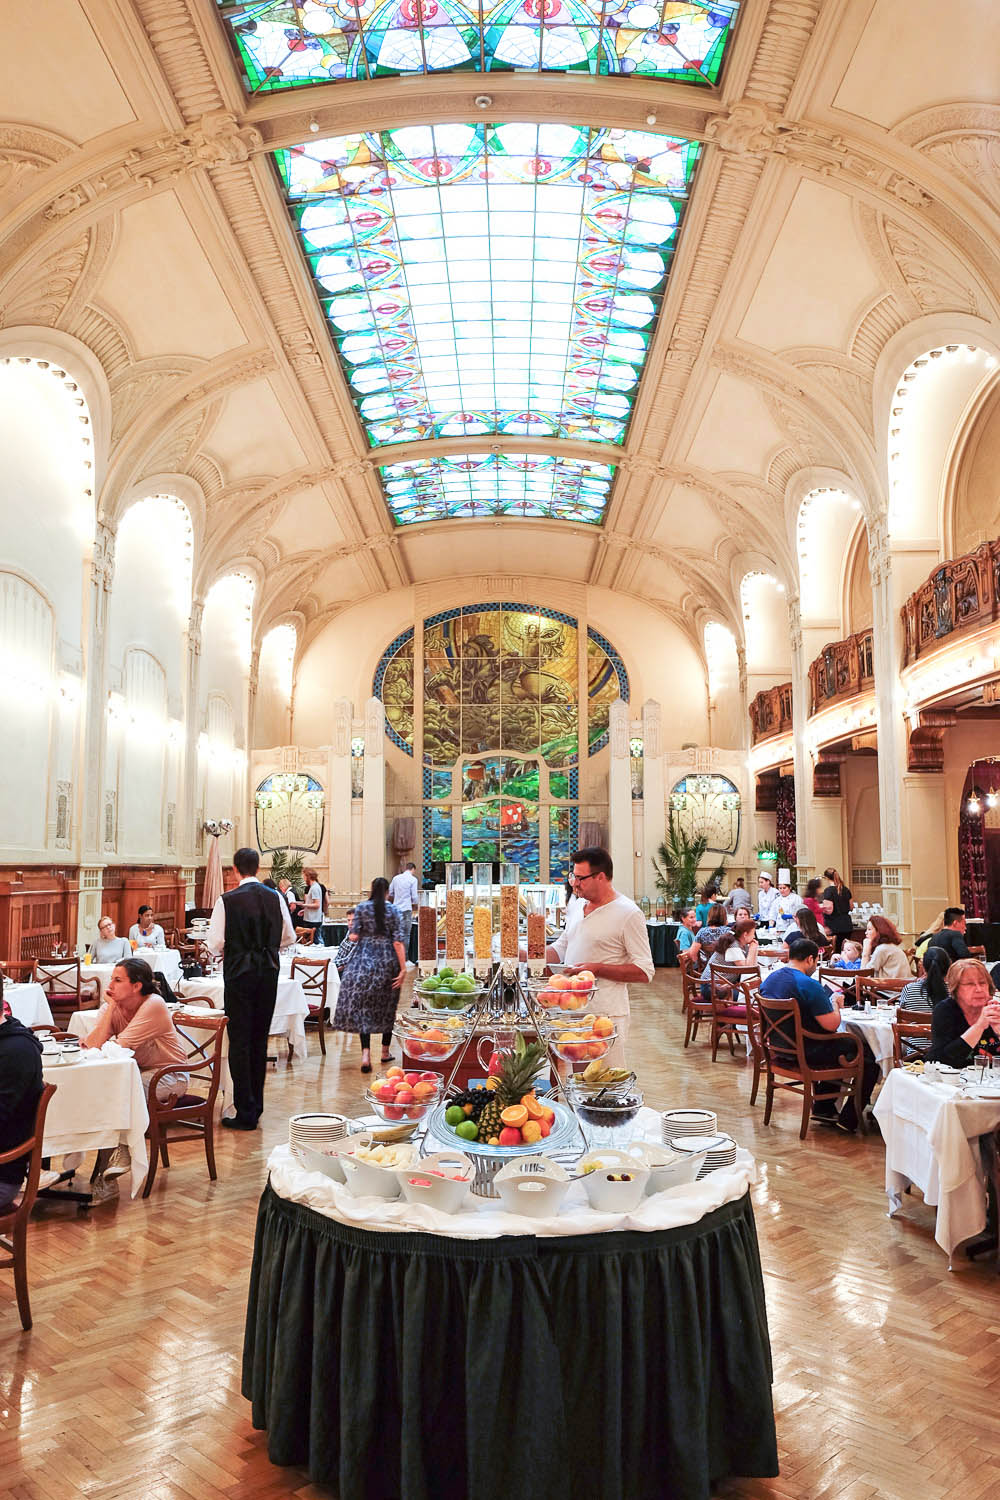 The Art Nouveau-style restaurant L'Europe at Belmond Grand Hotel Europe in Saint Petersburg, Russia